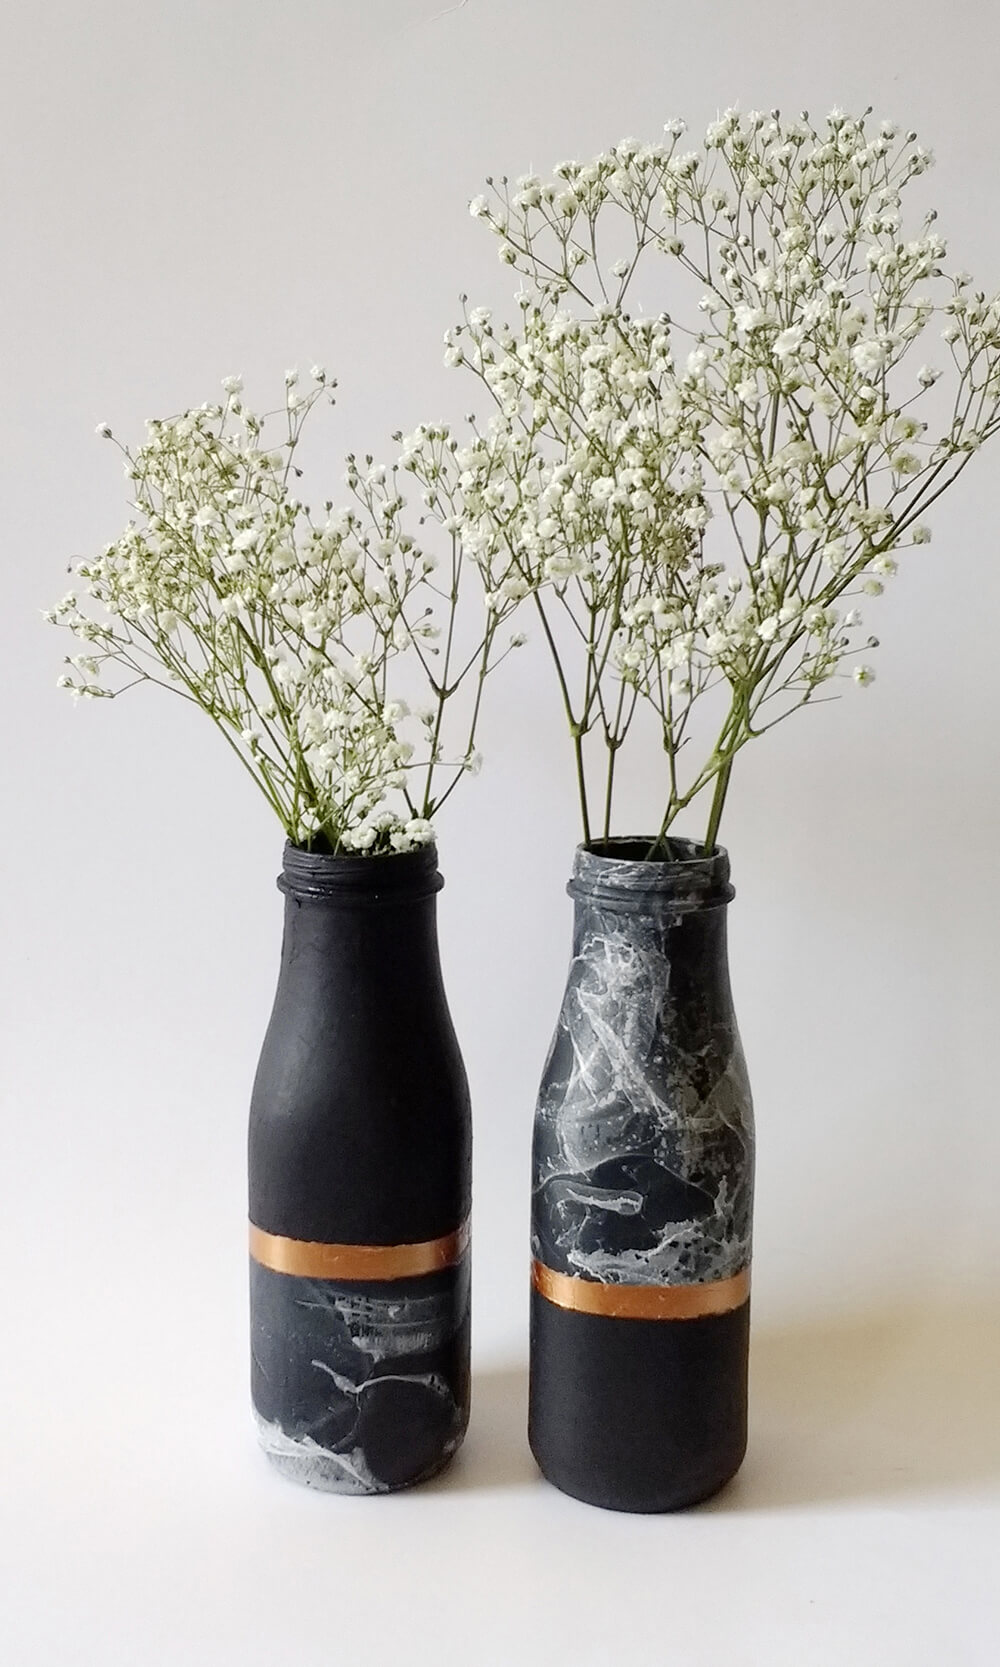 16 Cool DIY Bottle Painting Projects You'll Enjoy Crafting Over The Weekend